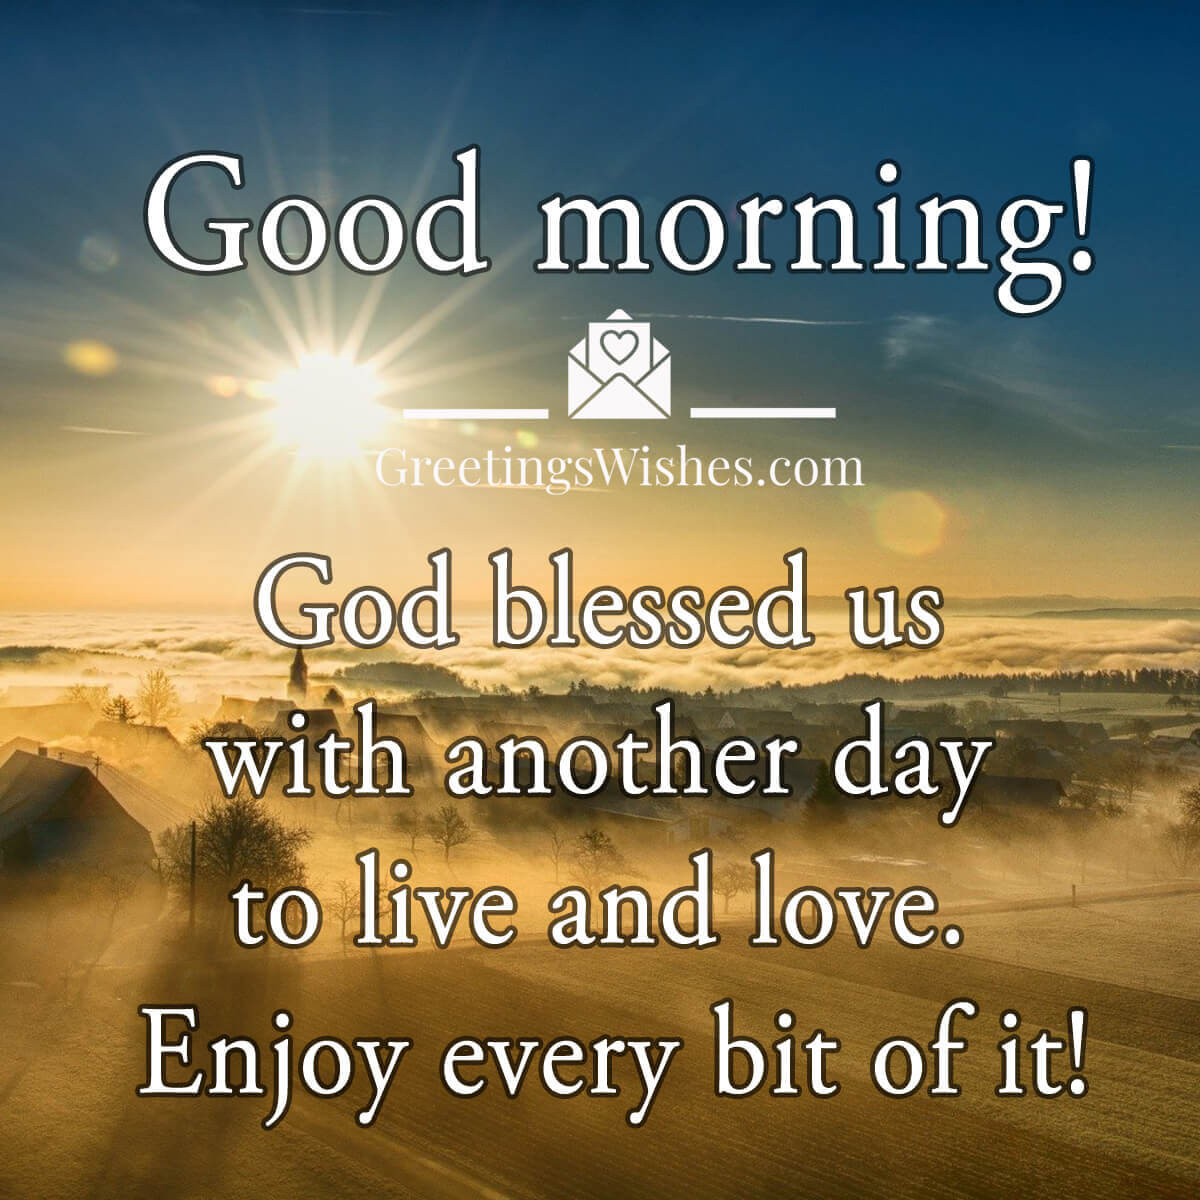 Good Morning Prayer Wishes - Greetings Wishes